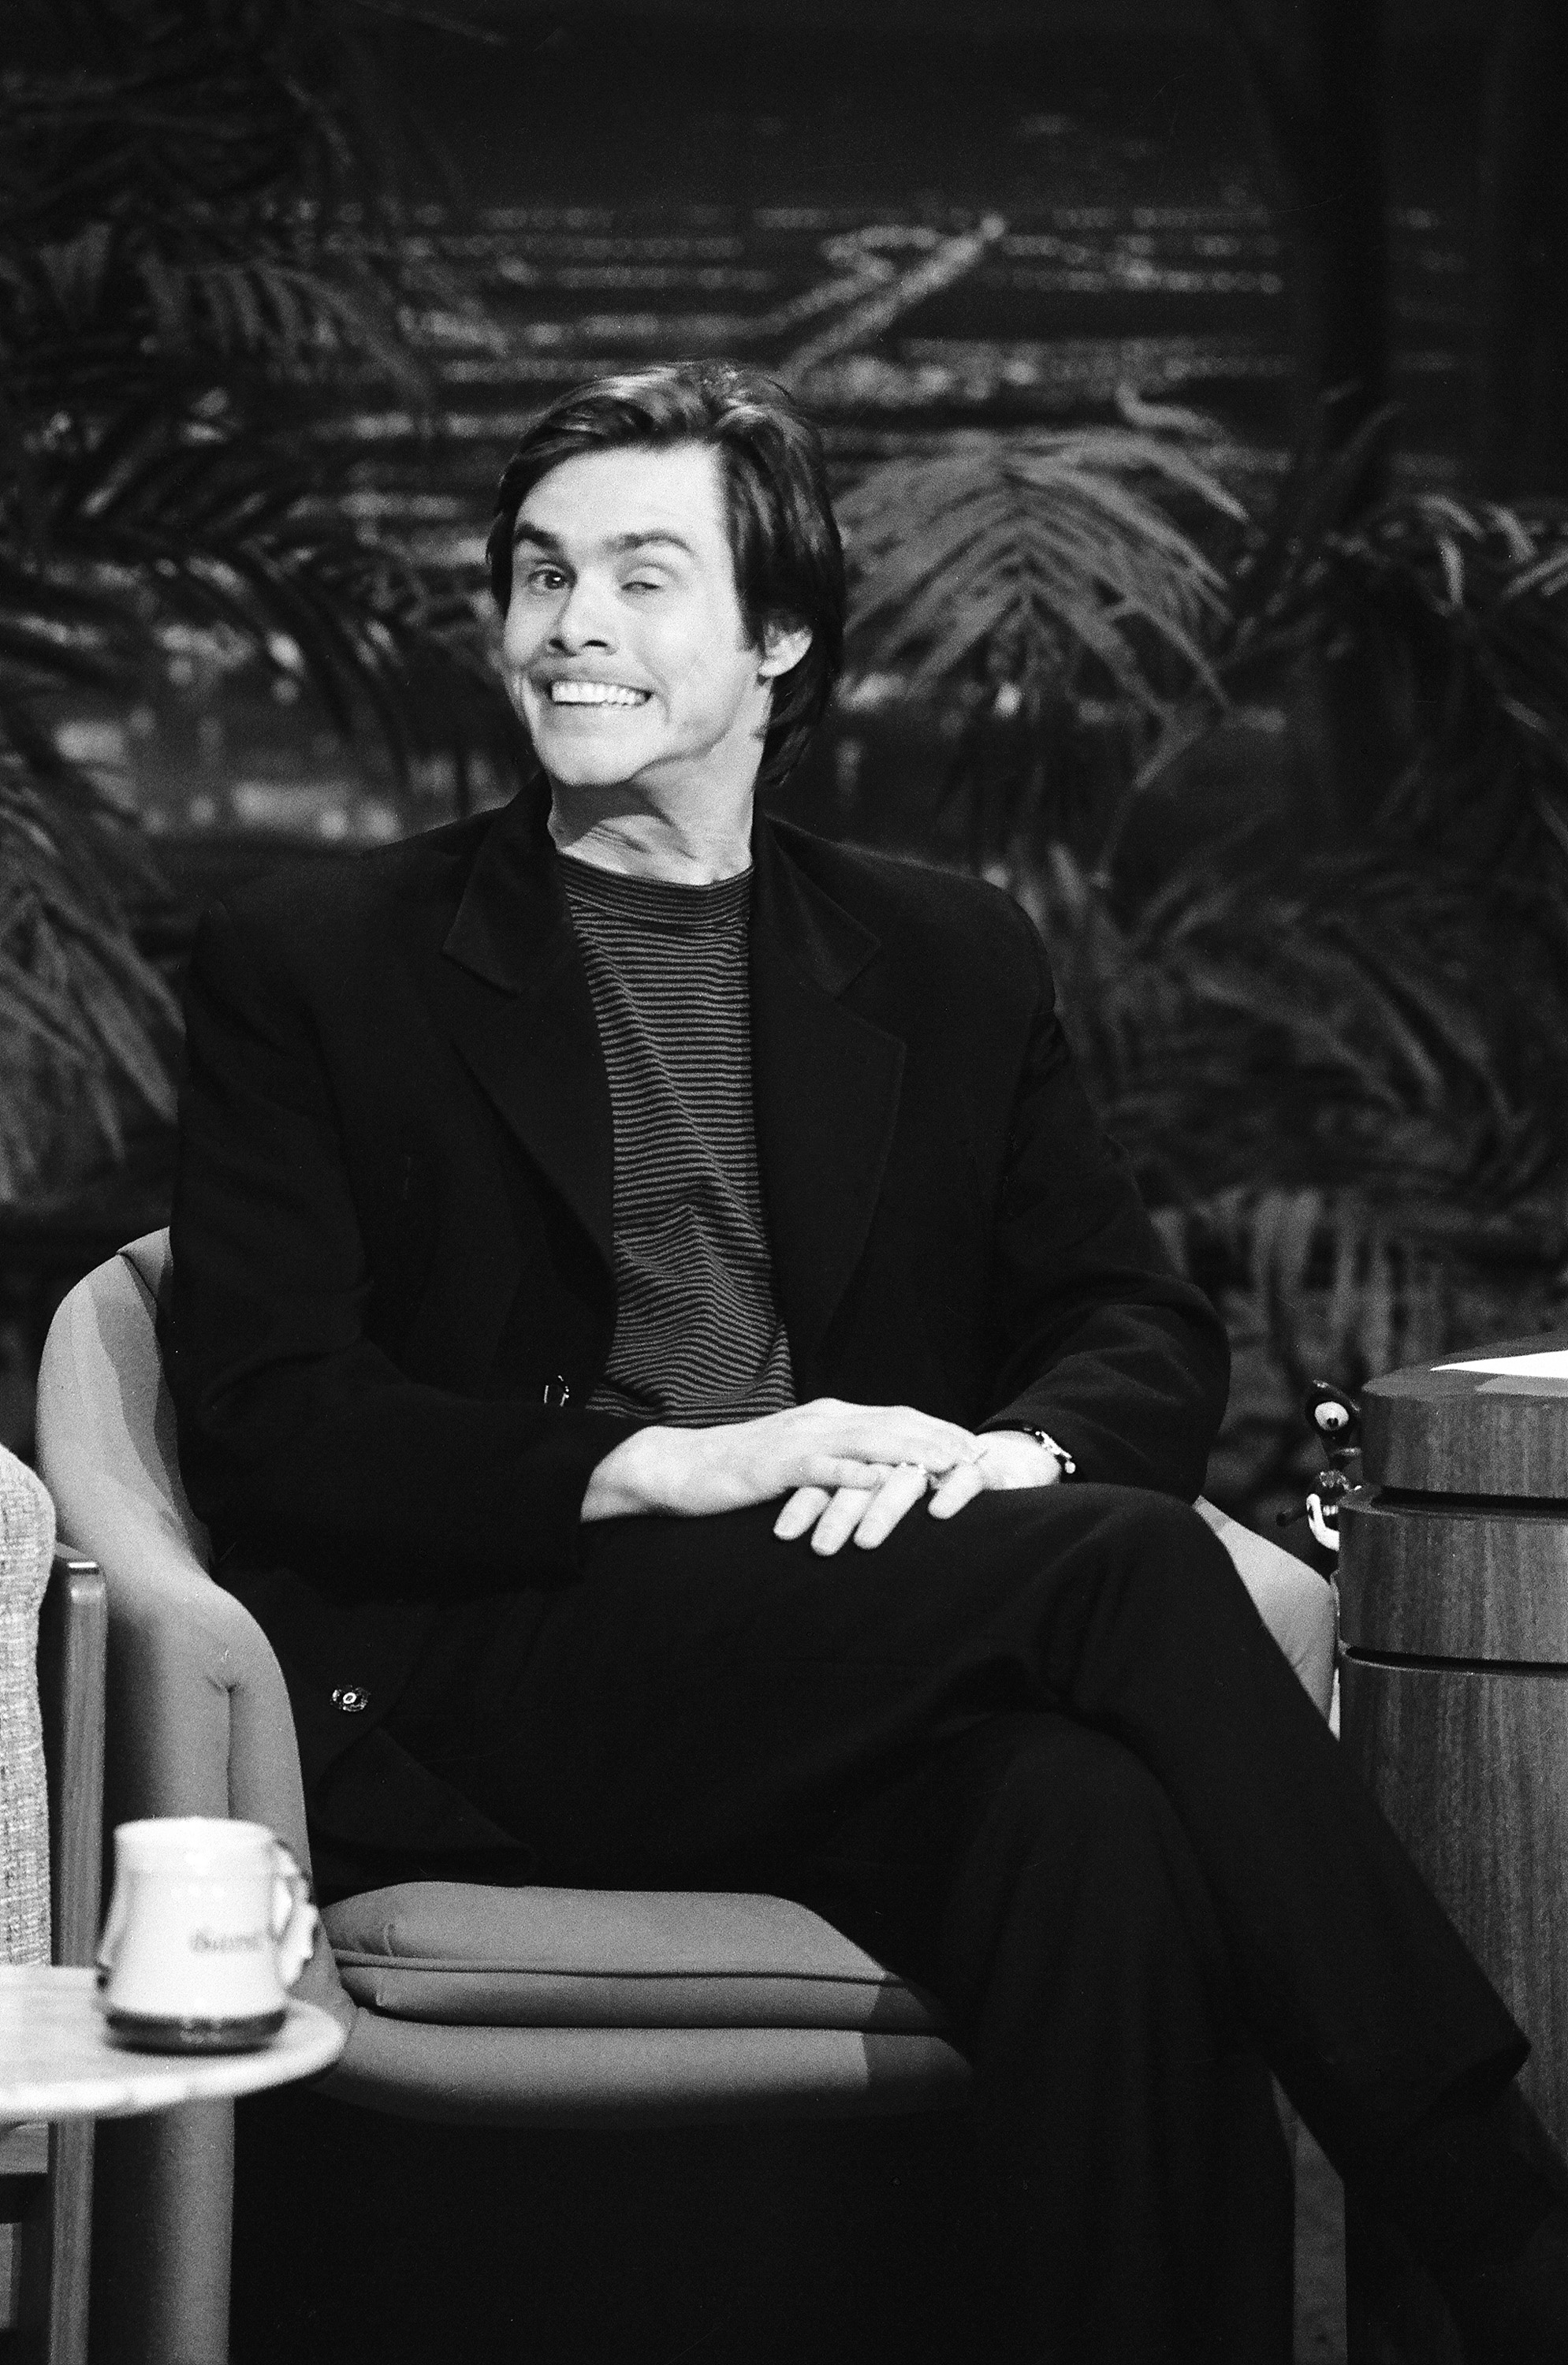 Comedian Jim Carrey pictured during an interview on "The Tonight Show Starring Johnny Carson" on March 25, 1991 | Source: Getty Images